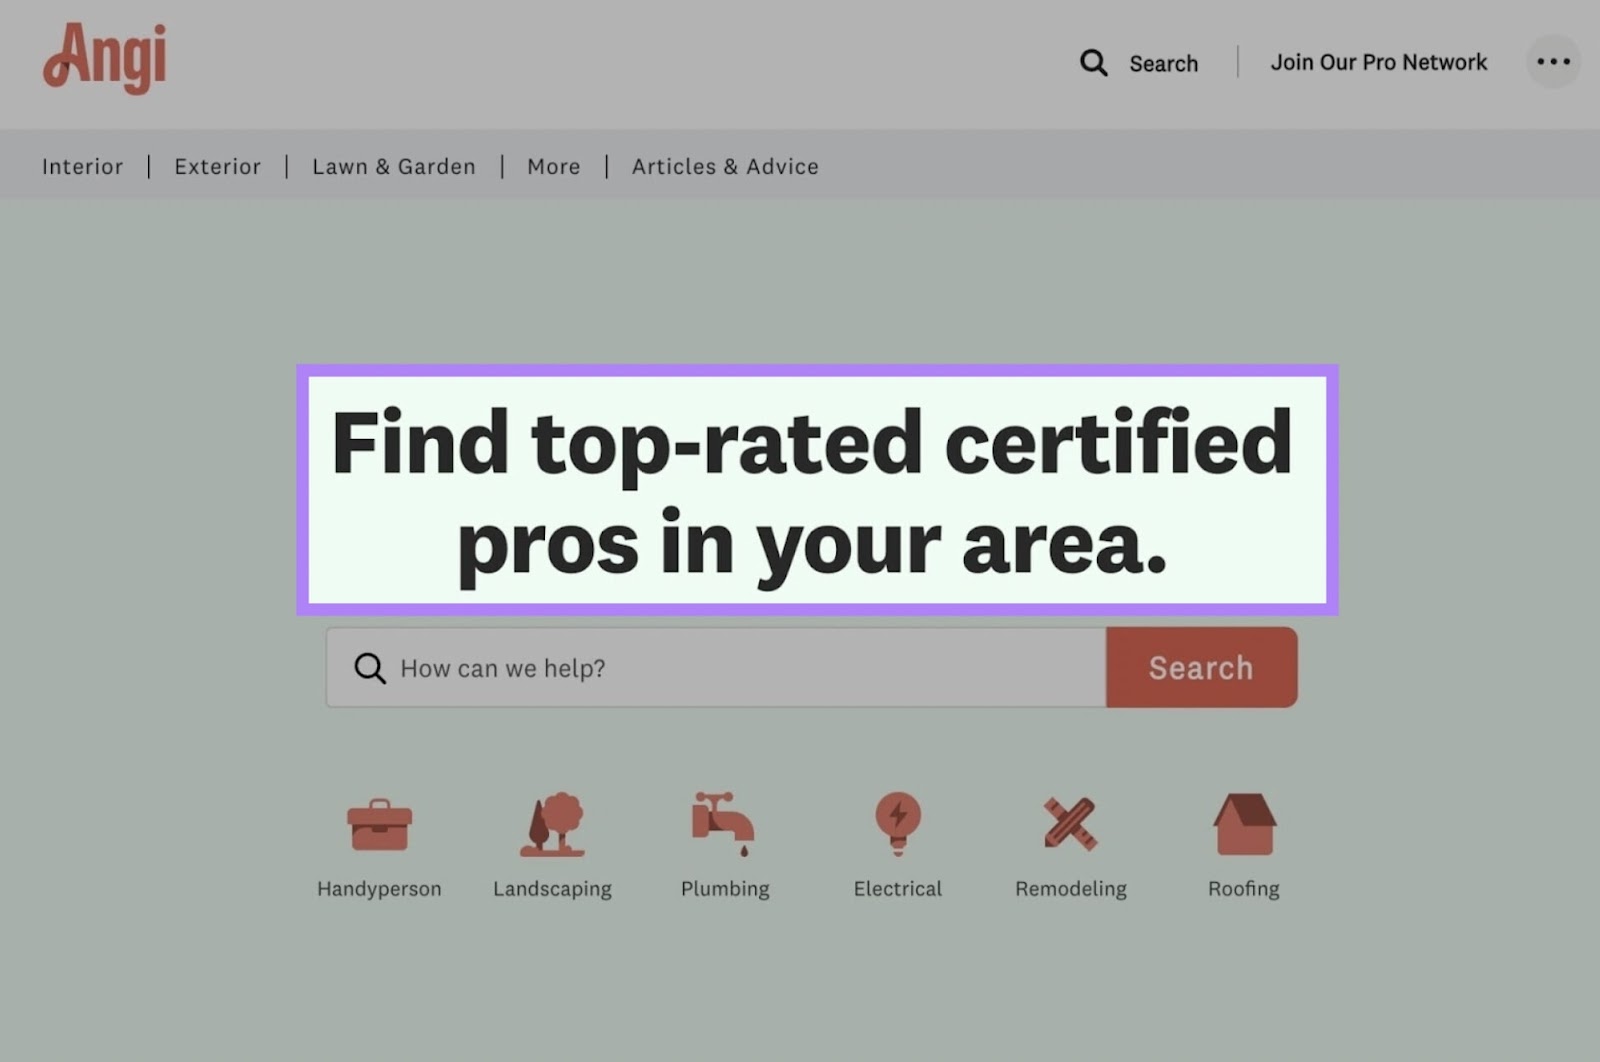 Angi landing page with compelling 'Find top-rated certified pros in your area' headline highlighted